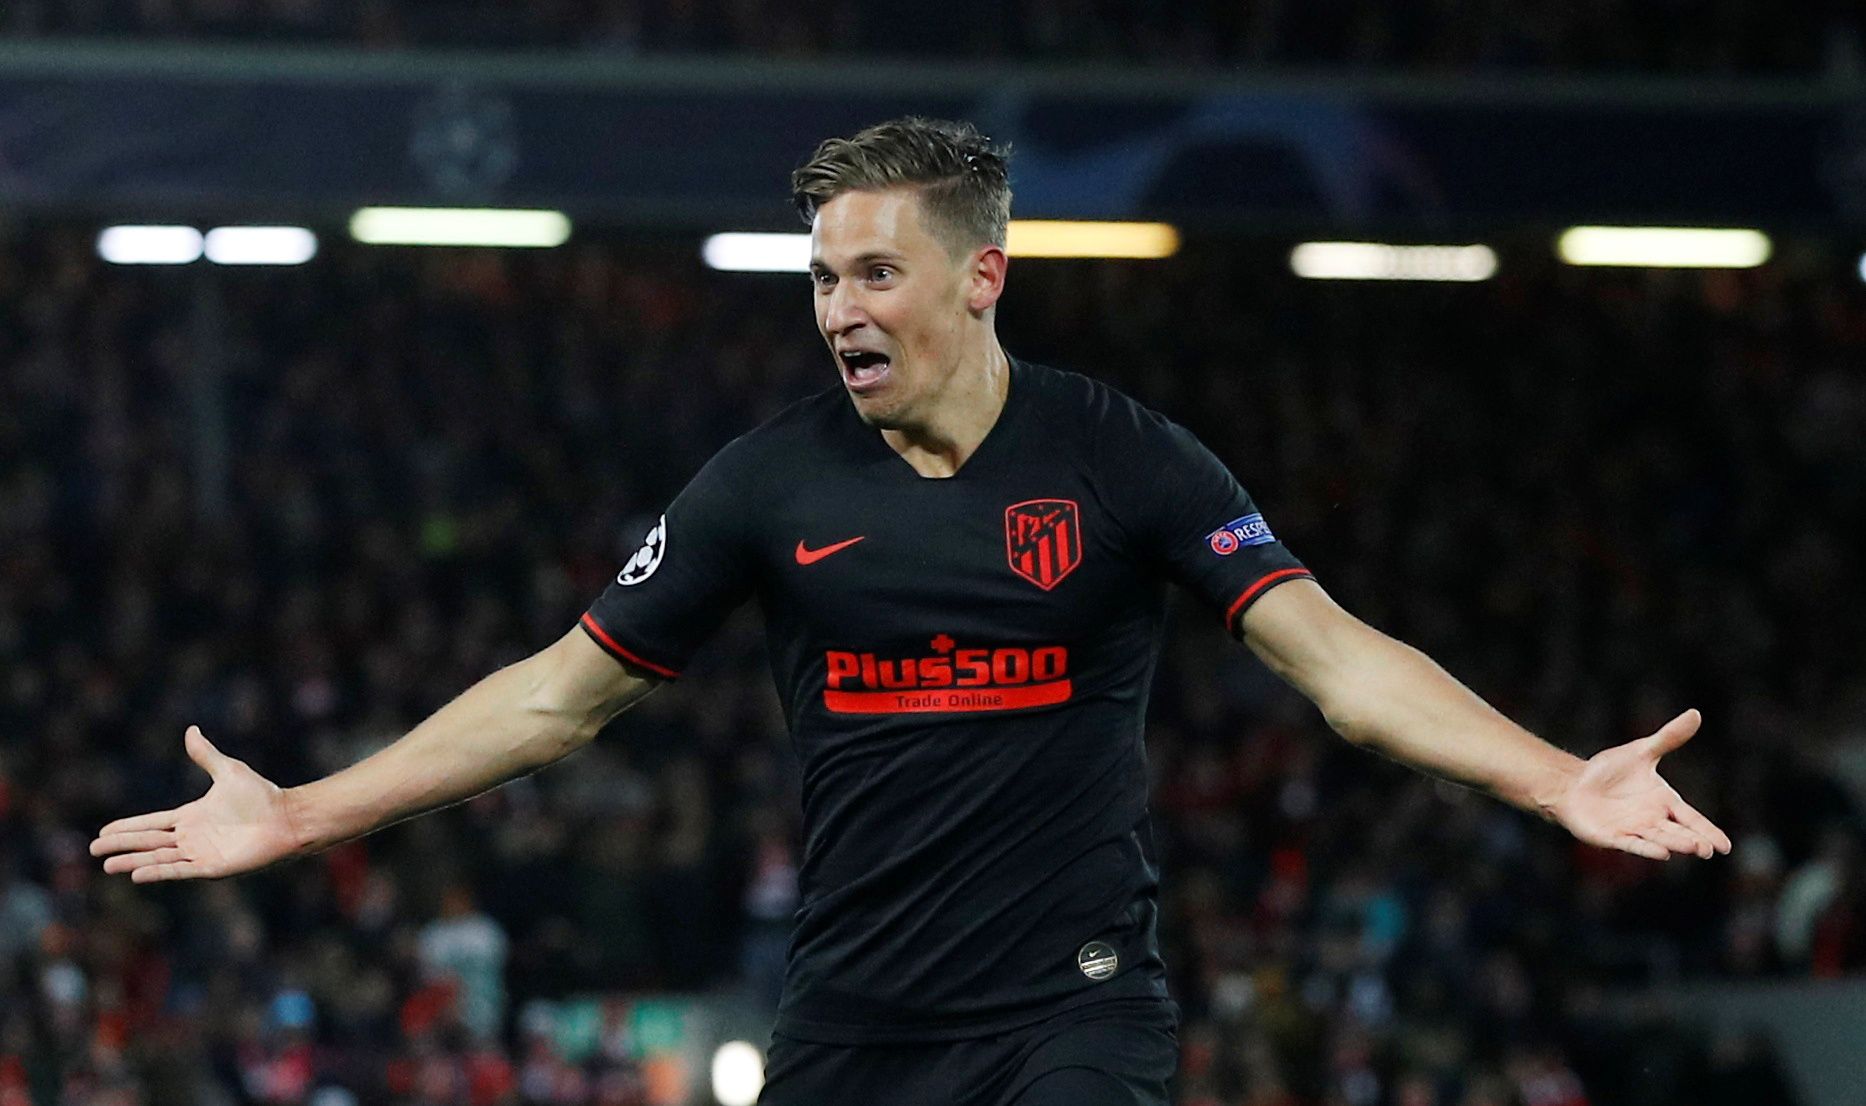 Soccer Football - Champions League - Round of 16 Second Leg - Liverpool v Atletico Madrid - Anfield, Liverpool, Britain - March 11, 2020  Atletico Madrid's Marcos Llorente celebrates scoring their second goal   REUTERS/Phil Noble